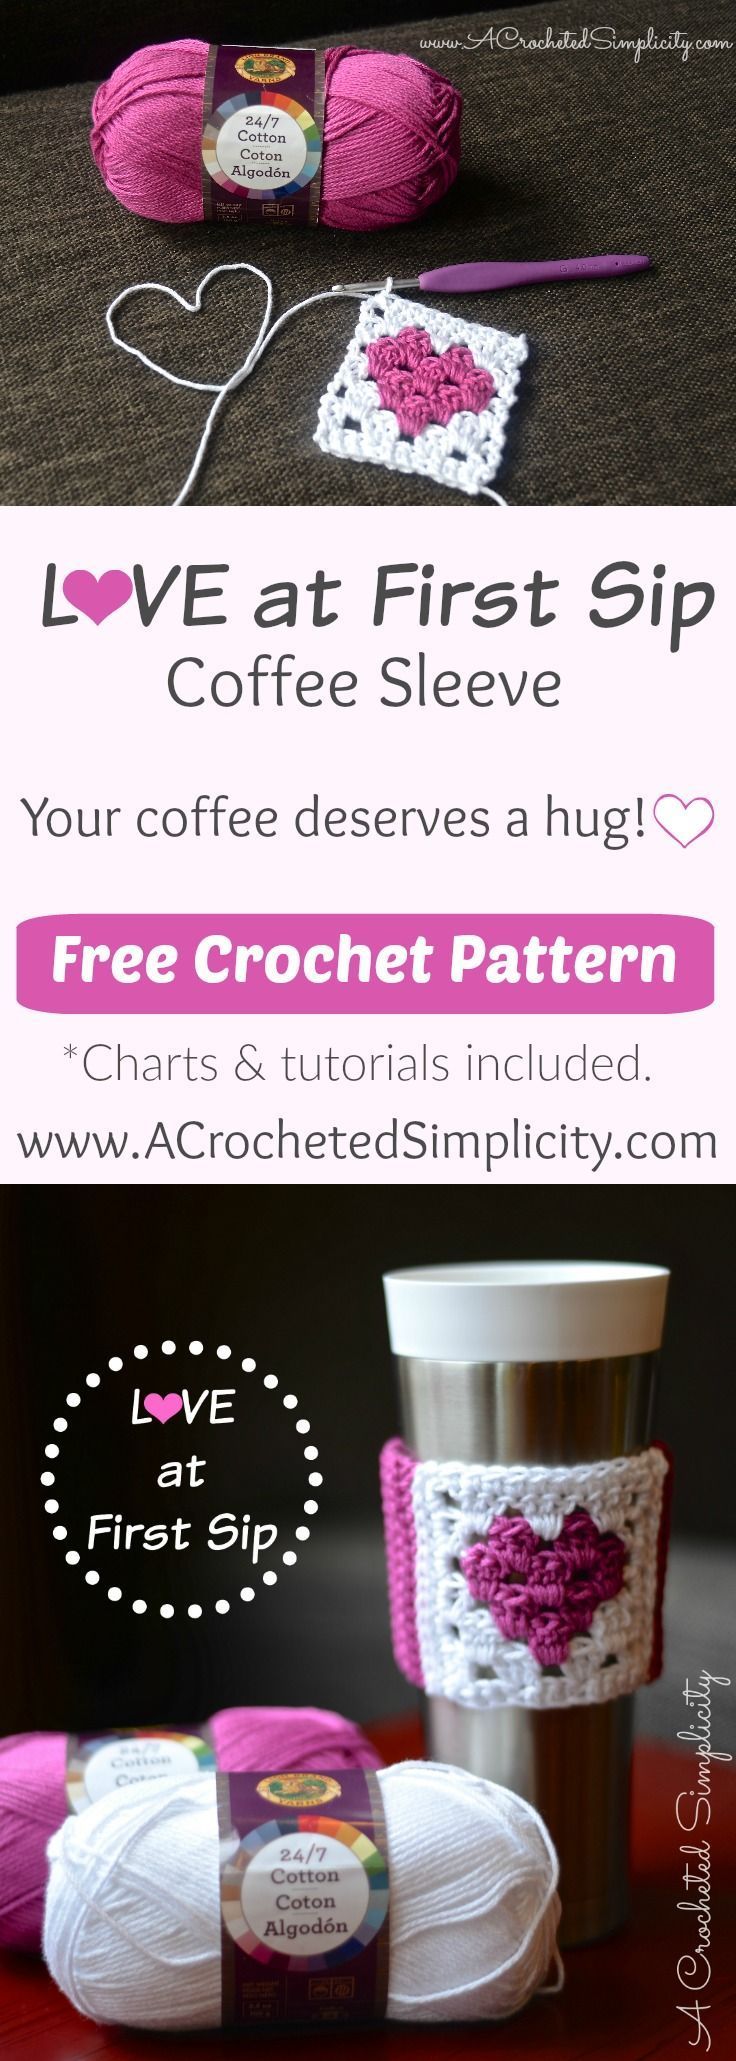 Free Crochet Pattern – Love at First Sip Coffee Sleeve by A Crocheted Simplicity